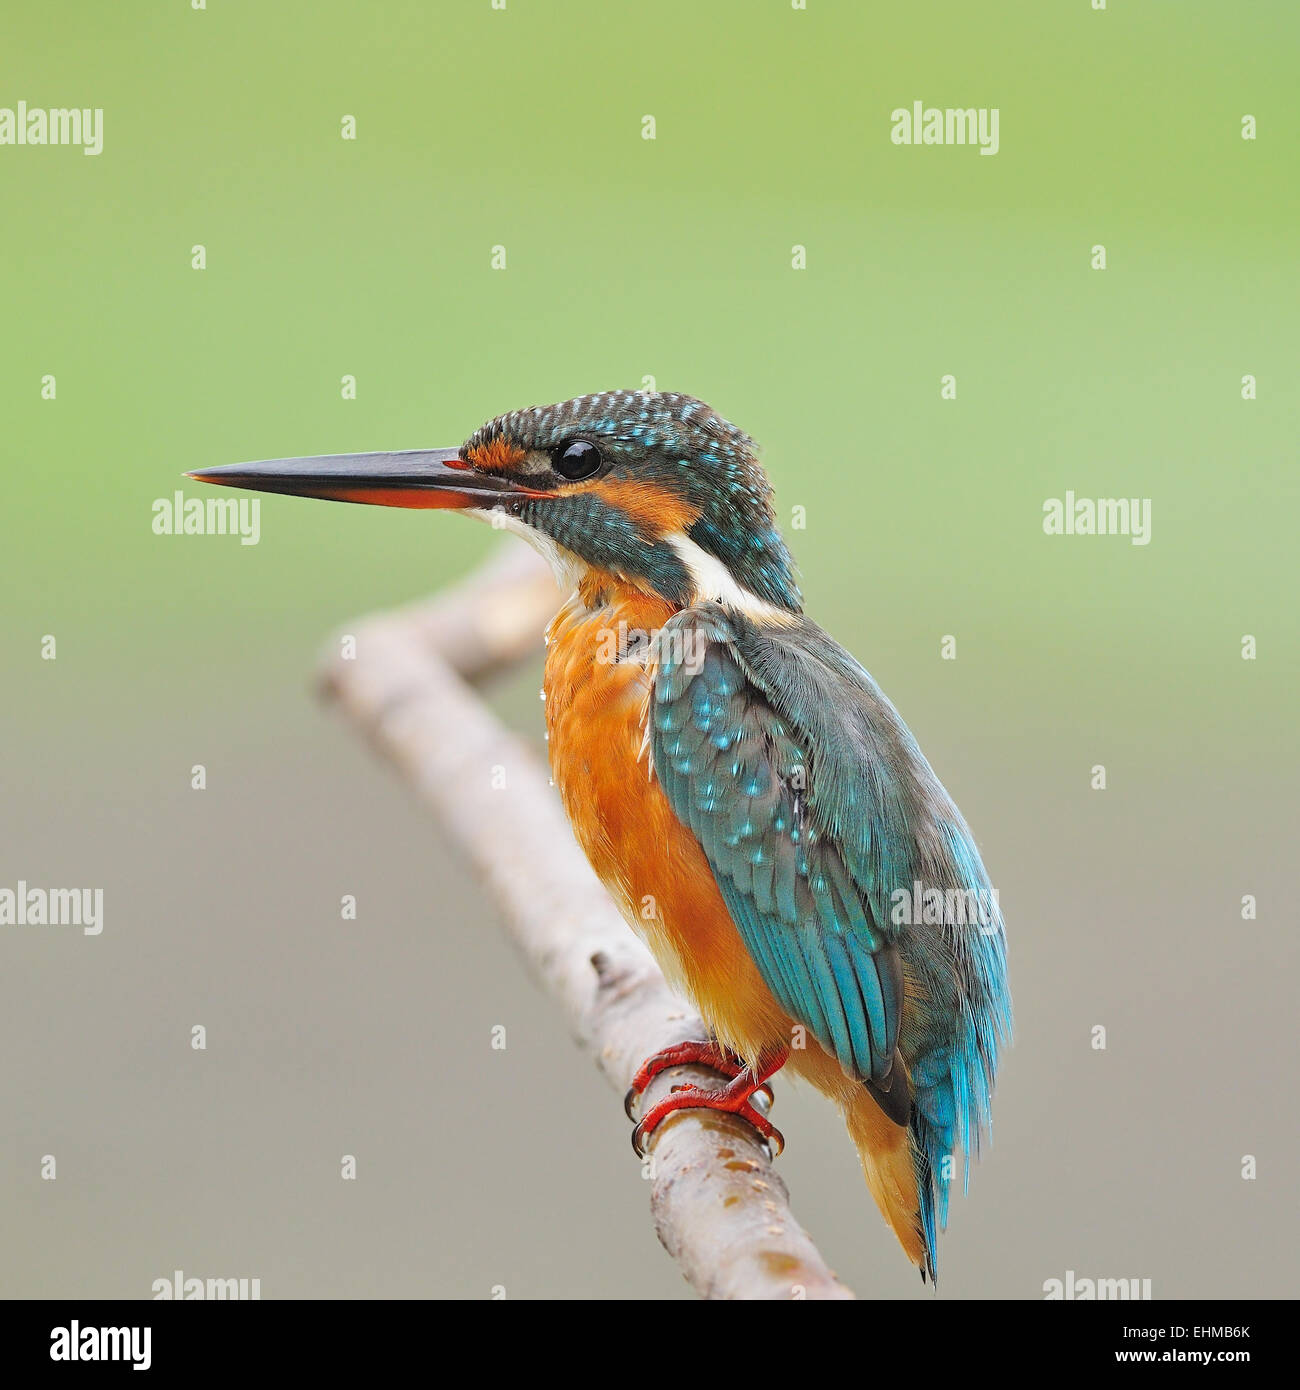 Colorful Kingfisher bird, female Common Kingfisher (Alcedo athis), standing on a branch Stock Photo